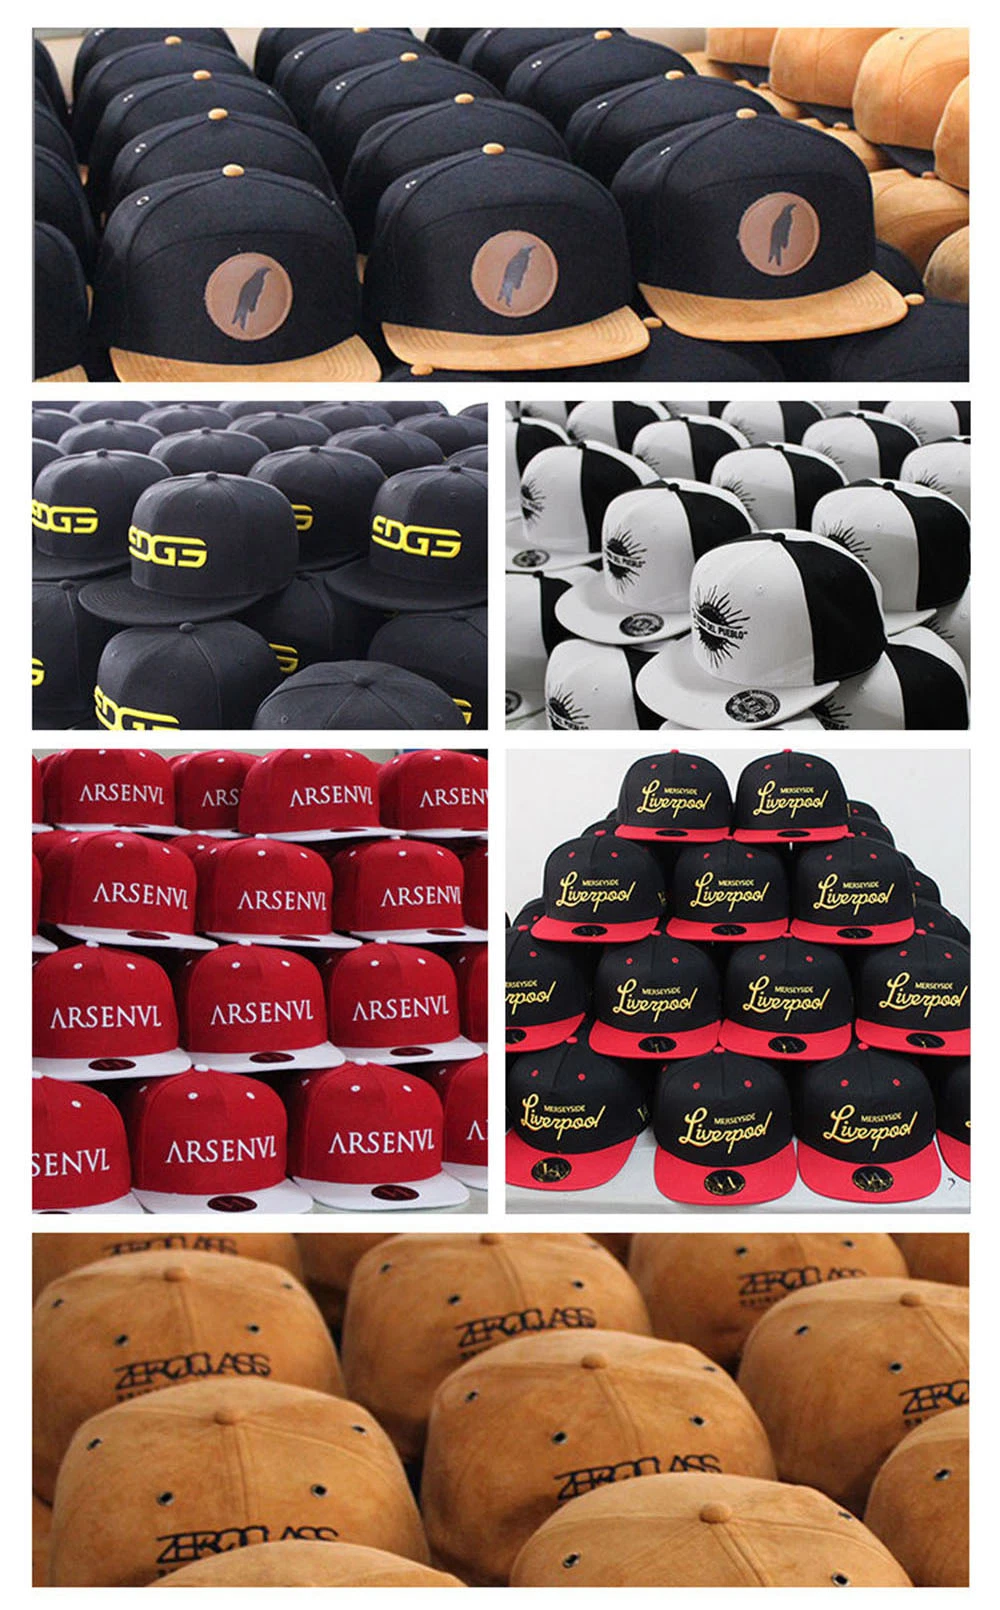 Printed or Embroidery Your Own Logo Custom Wholesale Bucket Hats